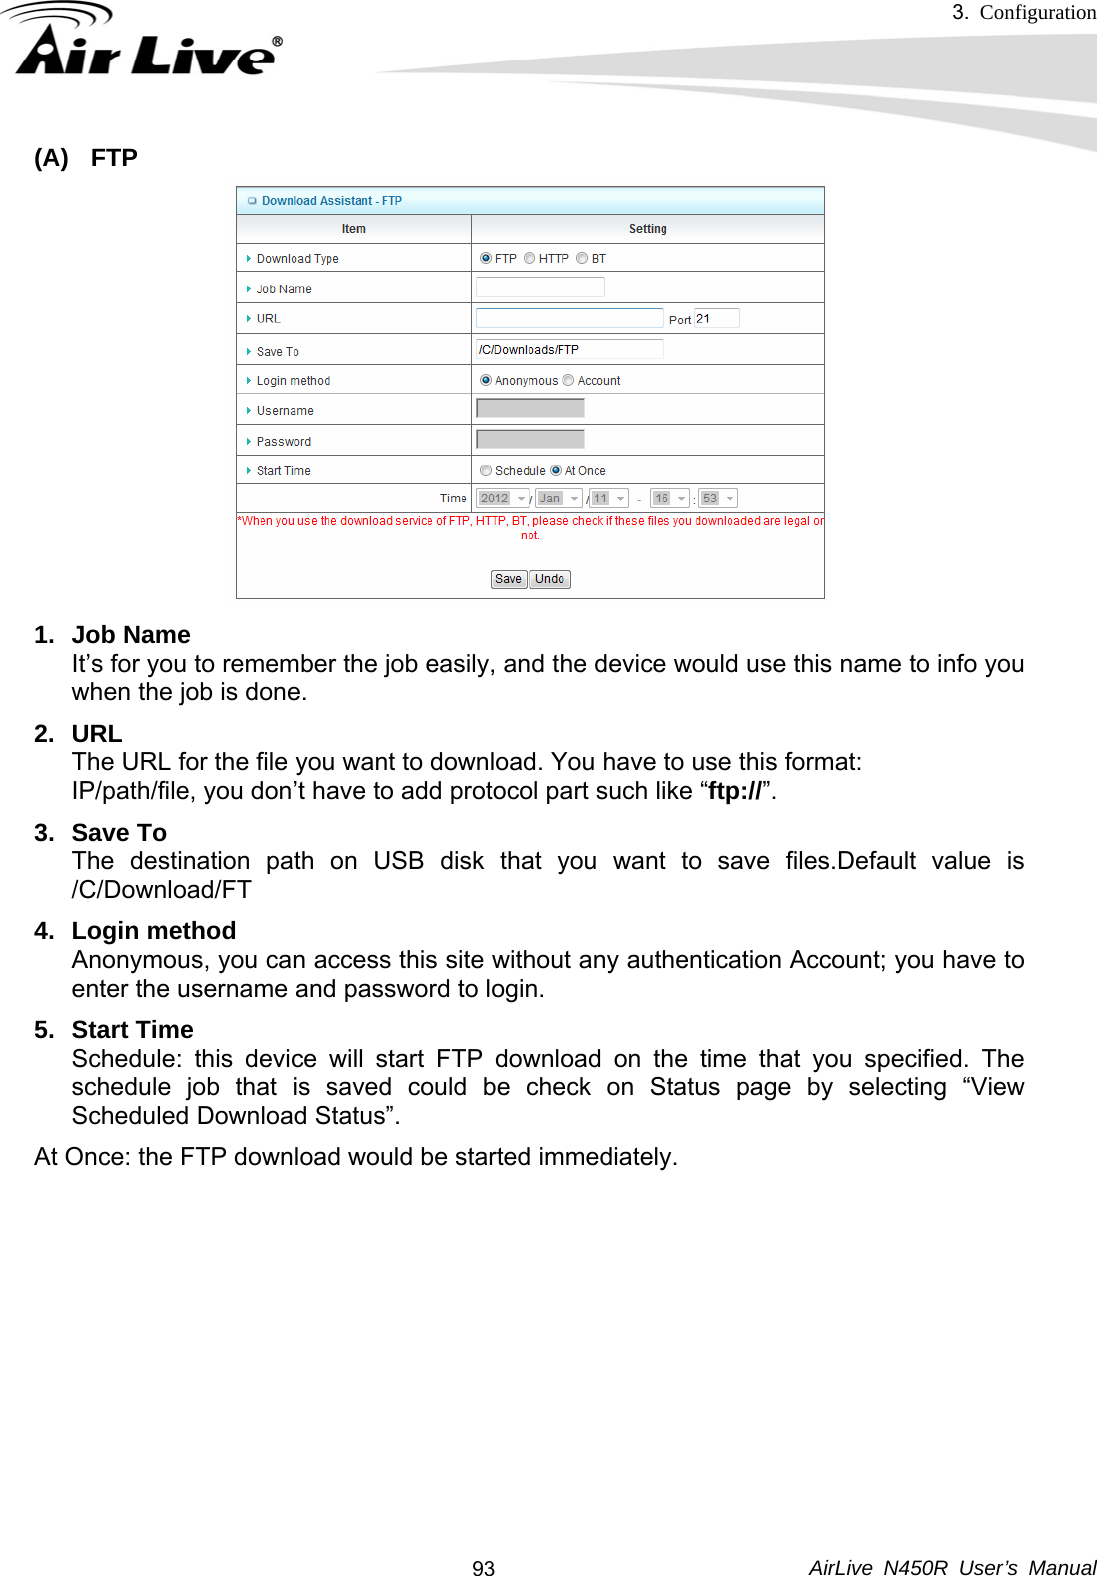 3.  Configuration     AirLive N450R User’s Manual  93(A) FTP 1. Job Name It’s for you to remember the job easily, and the device would use this name to info you when the job is done. 2. URL The URL for the file you want to download. You have to use this format: IP/path/file, you don’t have to add protocol part such like “ftp://”. 3. Save To The destination path on USB disk that you want to save files.Default value is /C/Download/FT 4. Login method  Anonymous, you can access this site without any authentication Account; you have to enter the username and password to login. 5. Start Time  Schedule: this device will start FTP download on the time that you specified. The schedule job that is saved could be check on Status page by selecting “View Scheduled Download Status”. At Once: the FTP download would be started immediately.      